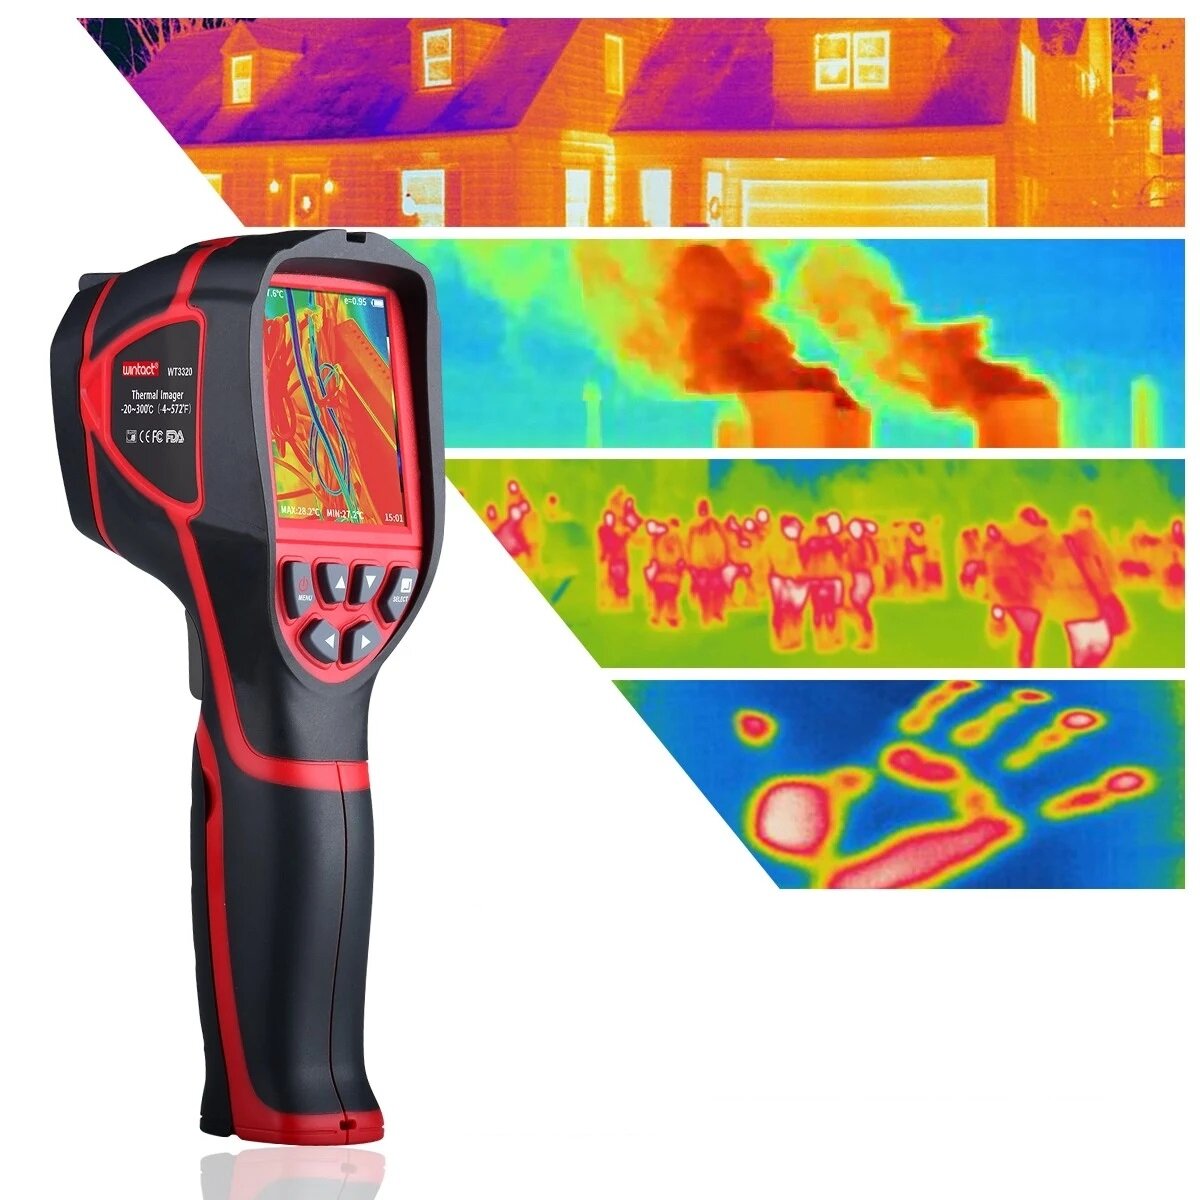 

WT3320 Handheld Infrared Thermal Imager 320*240 Infrared Image Resolution 2.8inch Color Screen Professional HD IR Therma